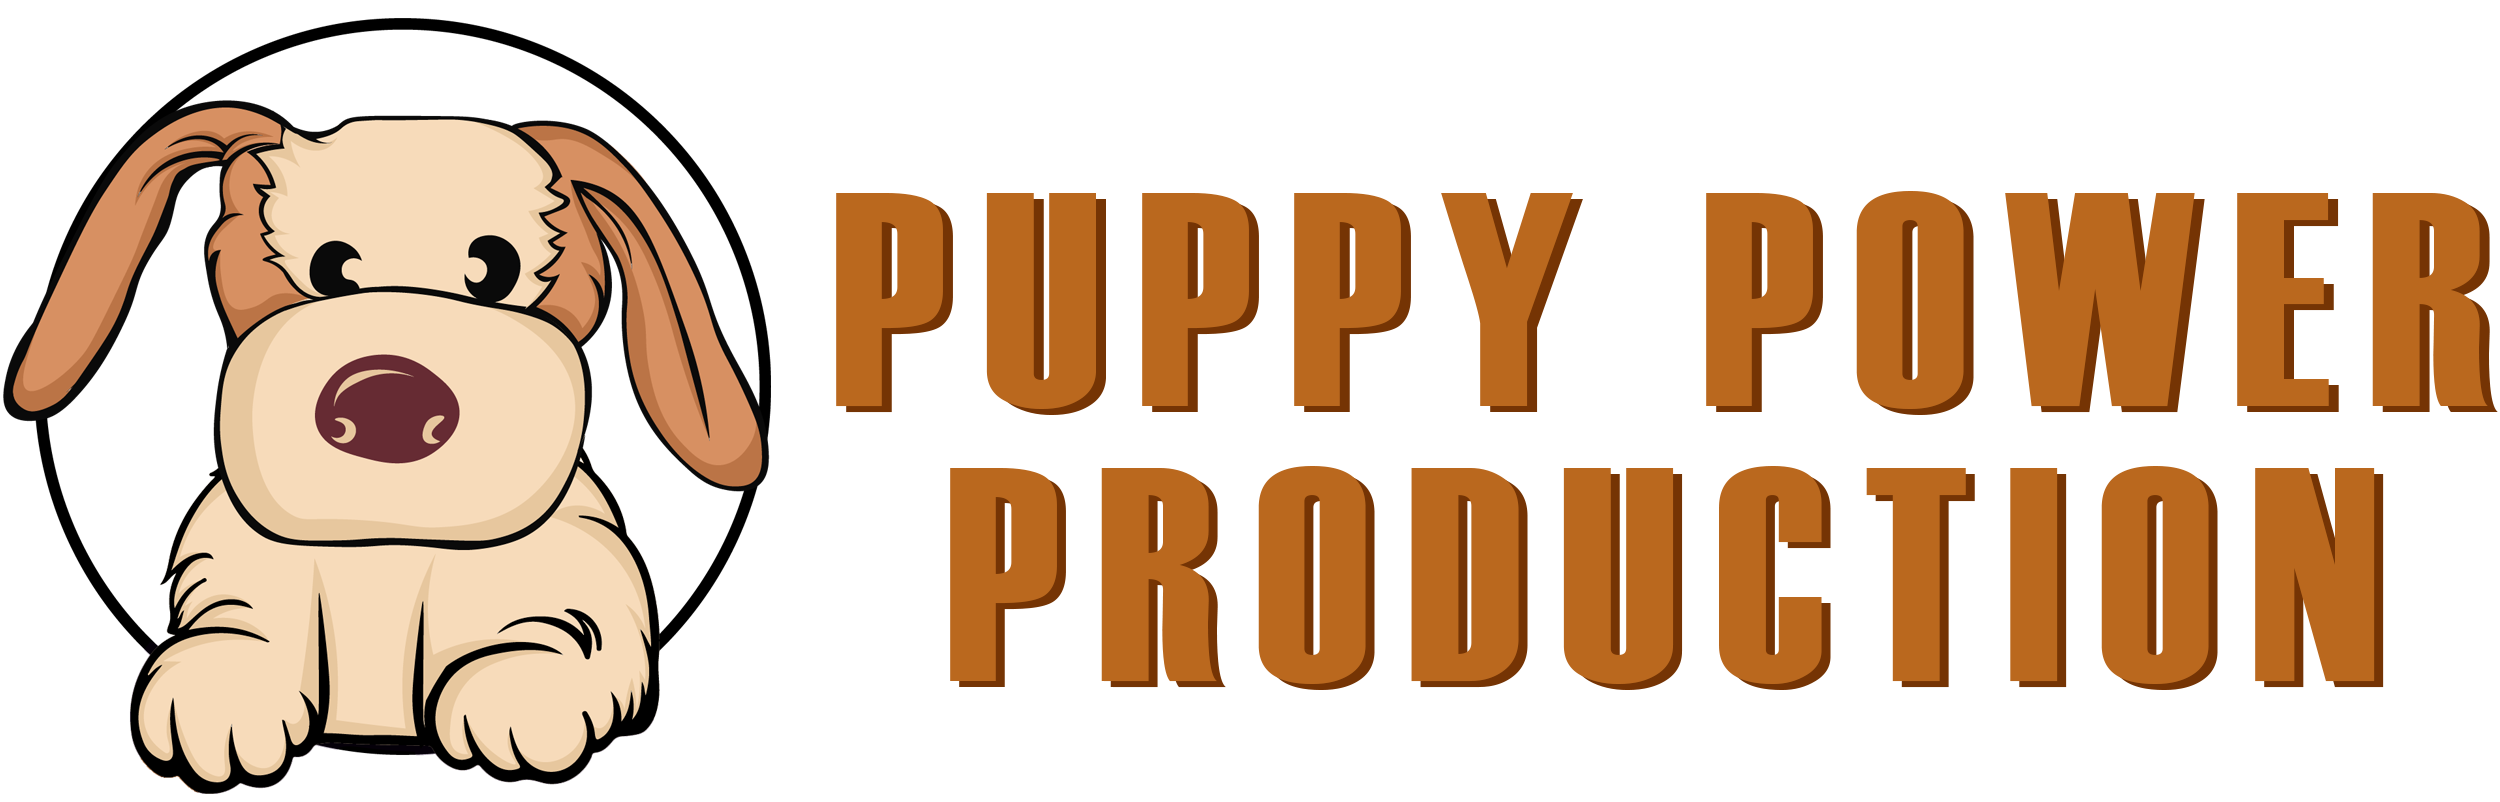 Puppy Power Production